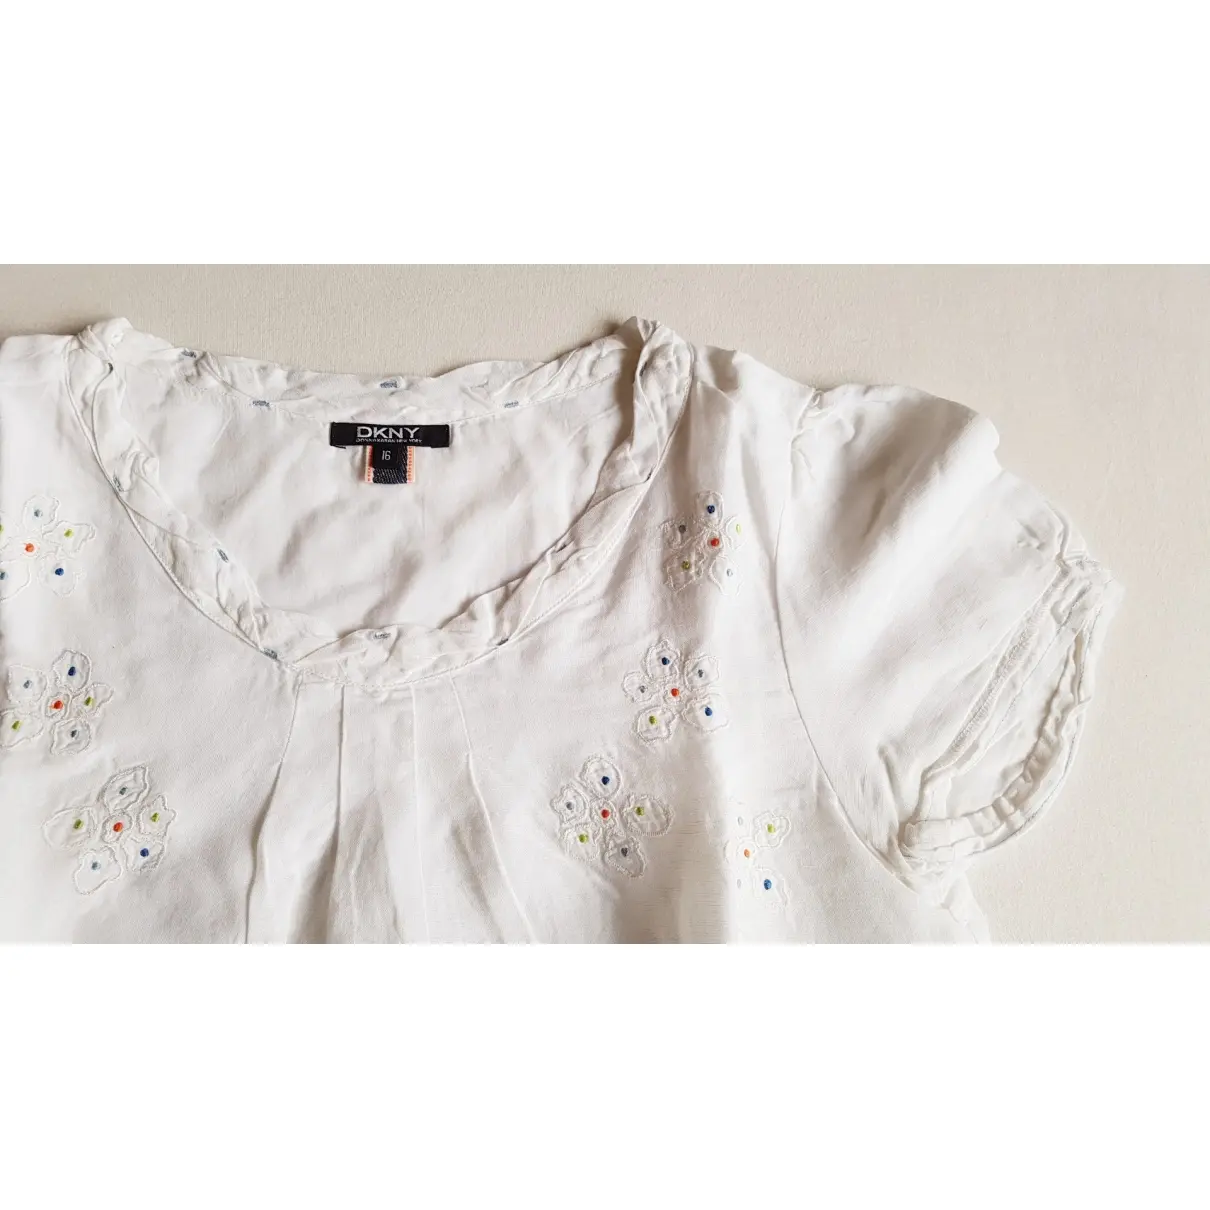 Dkny Linen top for sale